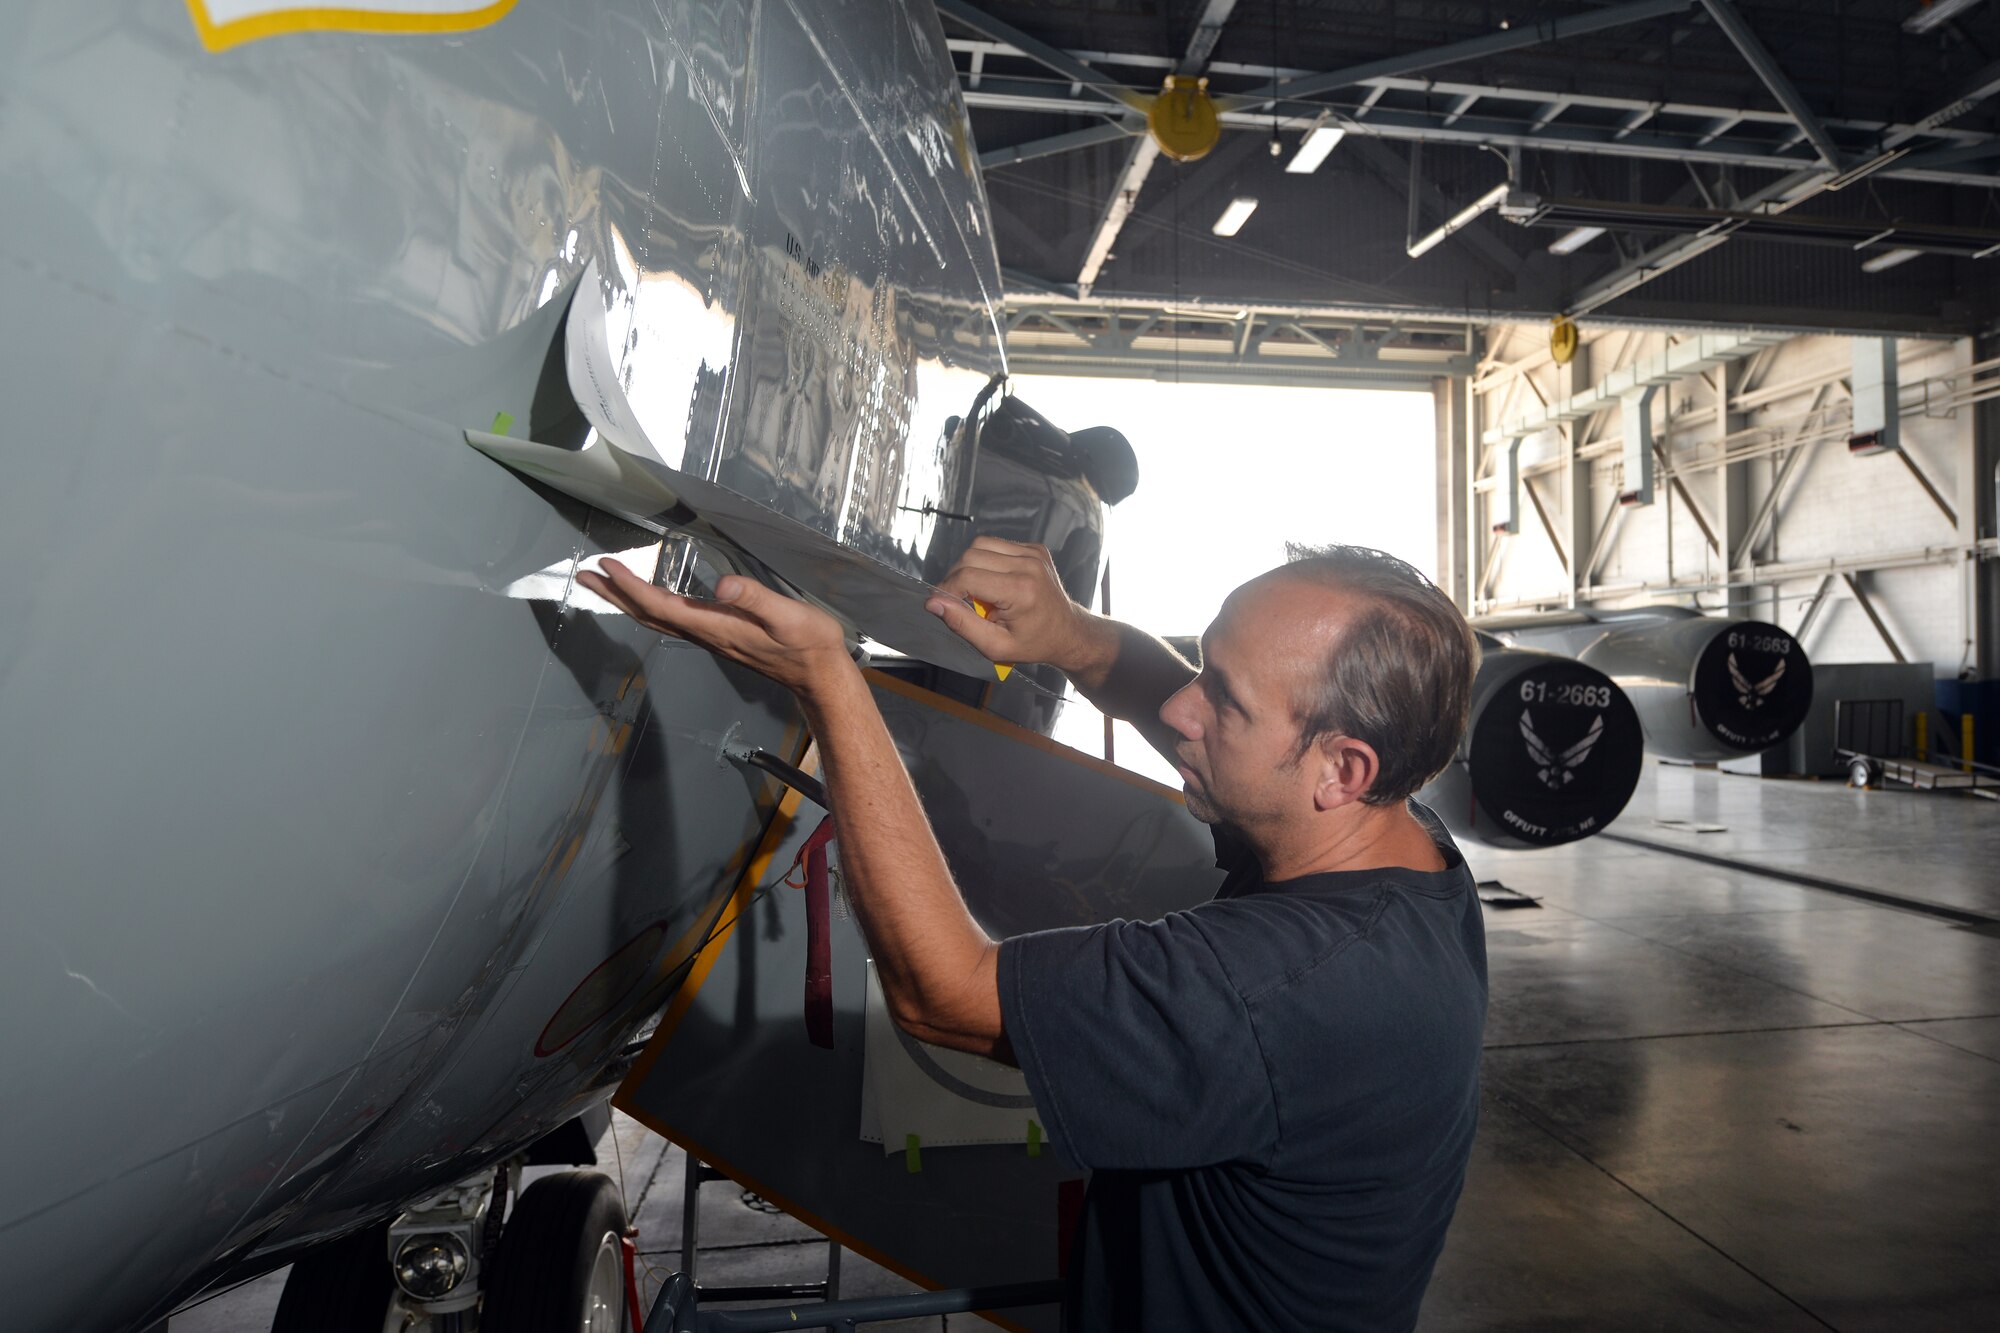 James Battig, a fabrication work leader with the 55th Maintenance Squadron, carefully reveals the inaugural piece of nose art that on an RC-135S Cobra Ball aircraft on Sept. 2, Offutt Air Force Base, Neb.  Members of the 55th Maintenance squadron are responsible for commissioning the art pieces that will grace the noses of the RC fleet.  (U.S. Air Force Photo by Josh Plueger/Released)